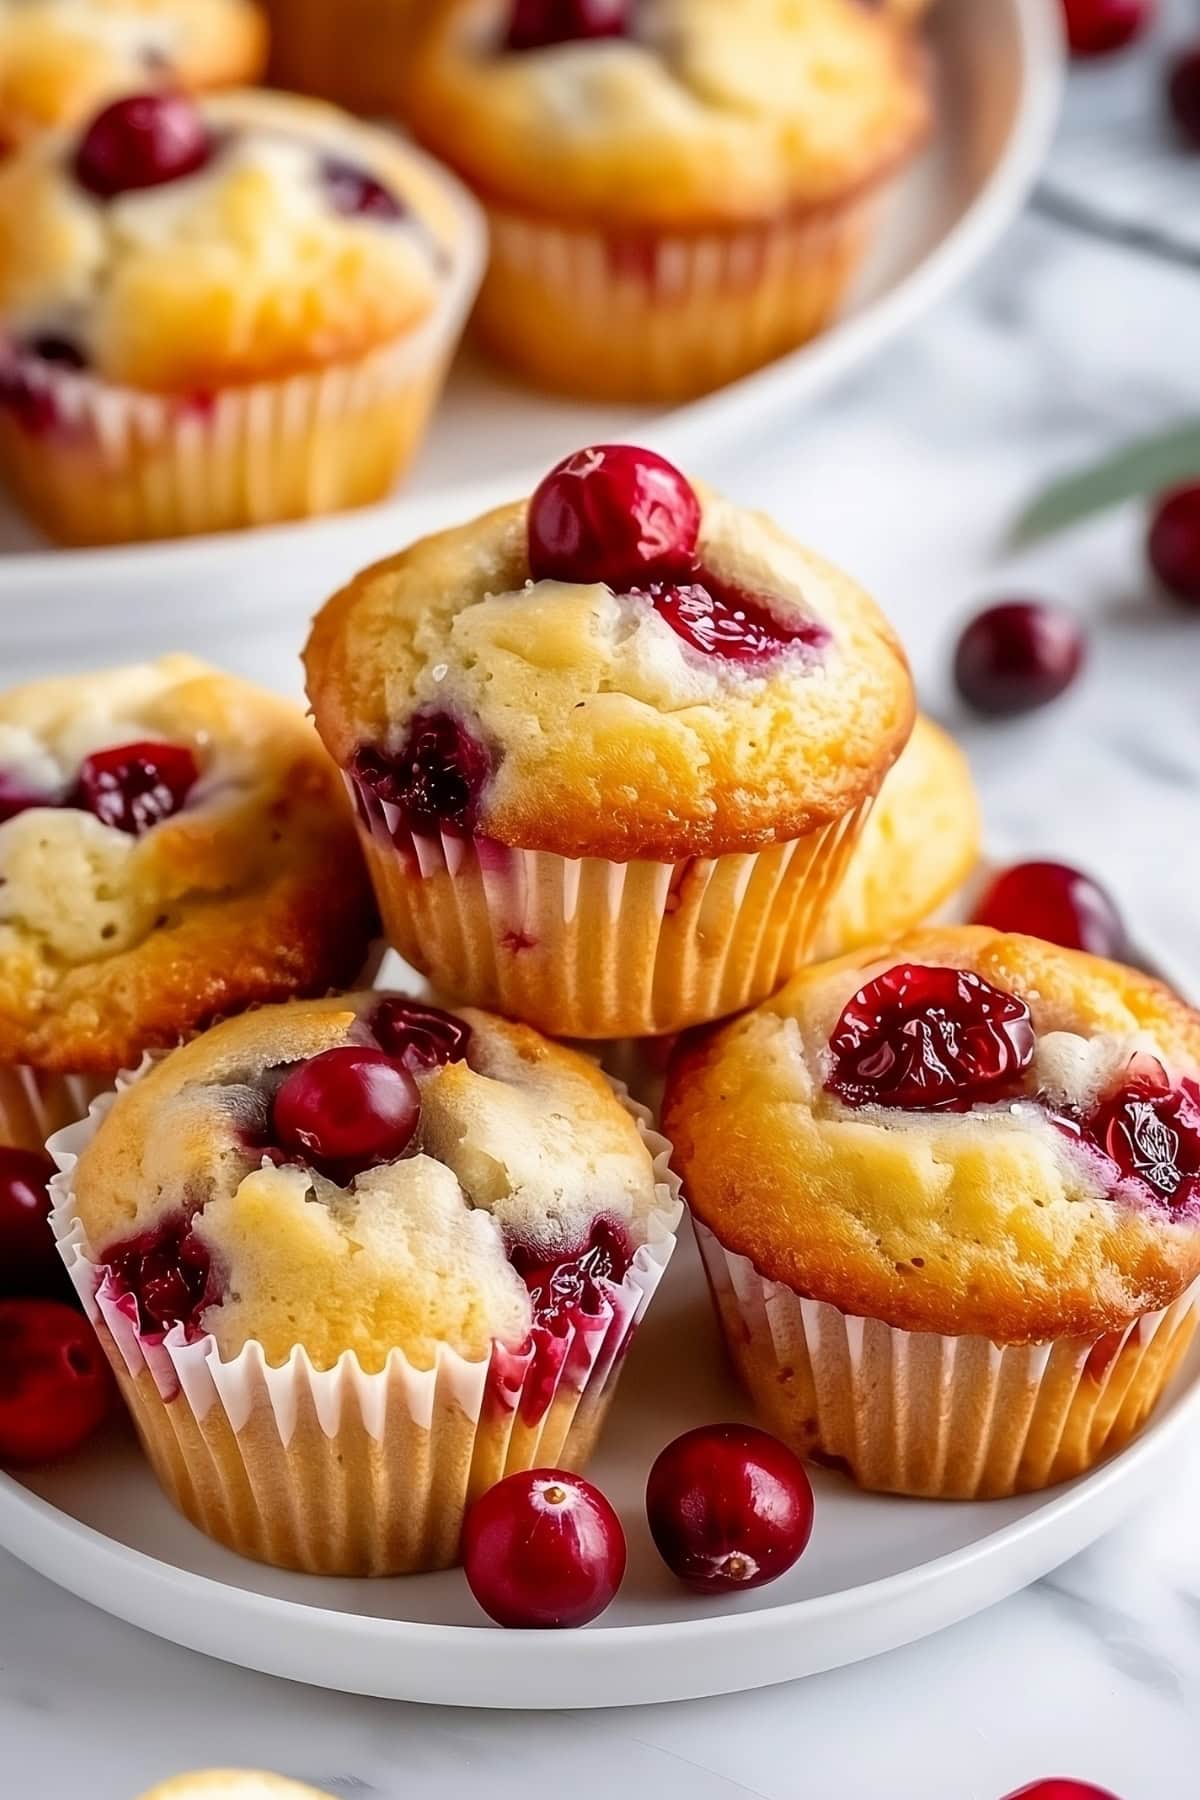 Muffins with cranberries arranged in a white plate.